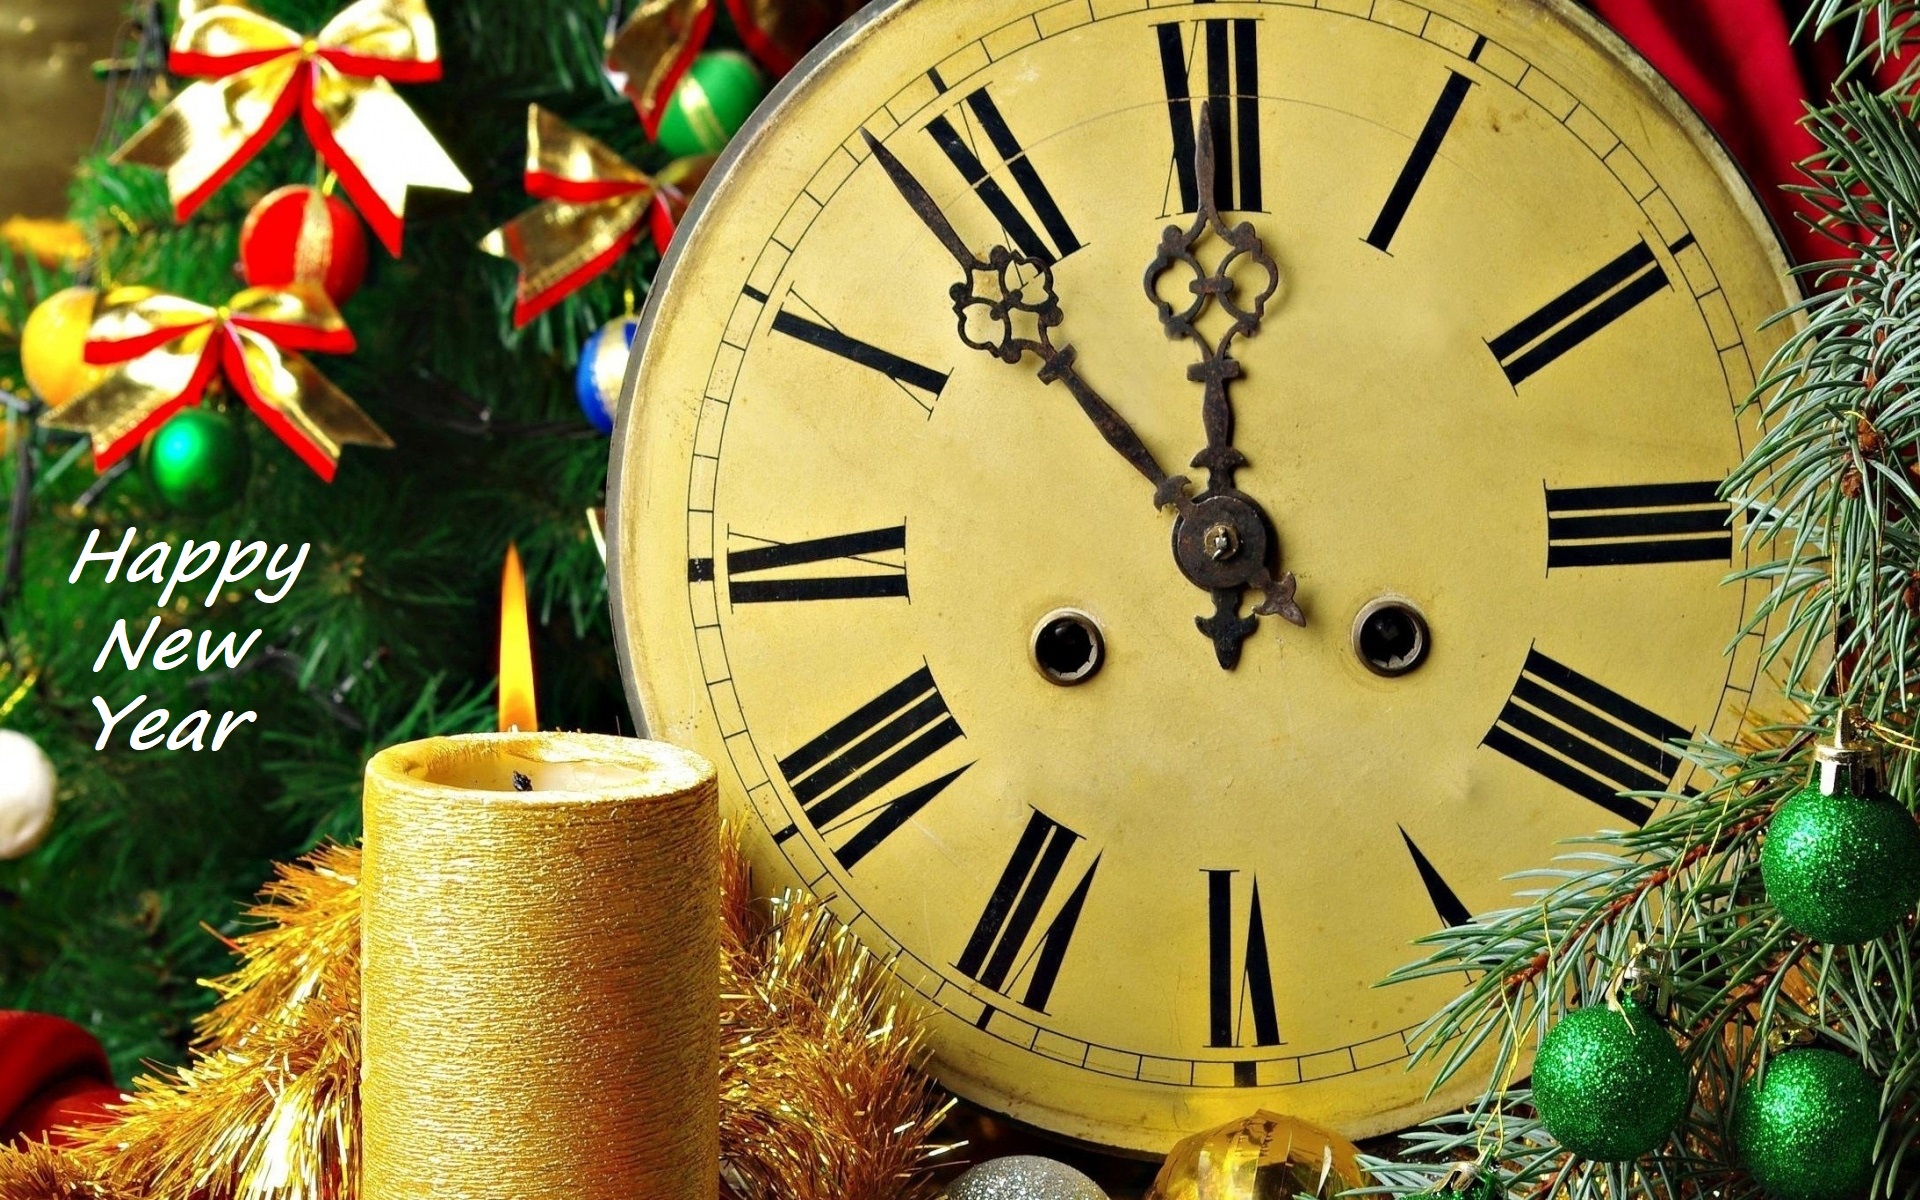 Candle Christmas Clock Decoration New Year 1920x1200